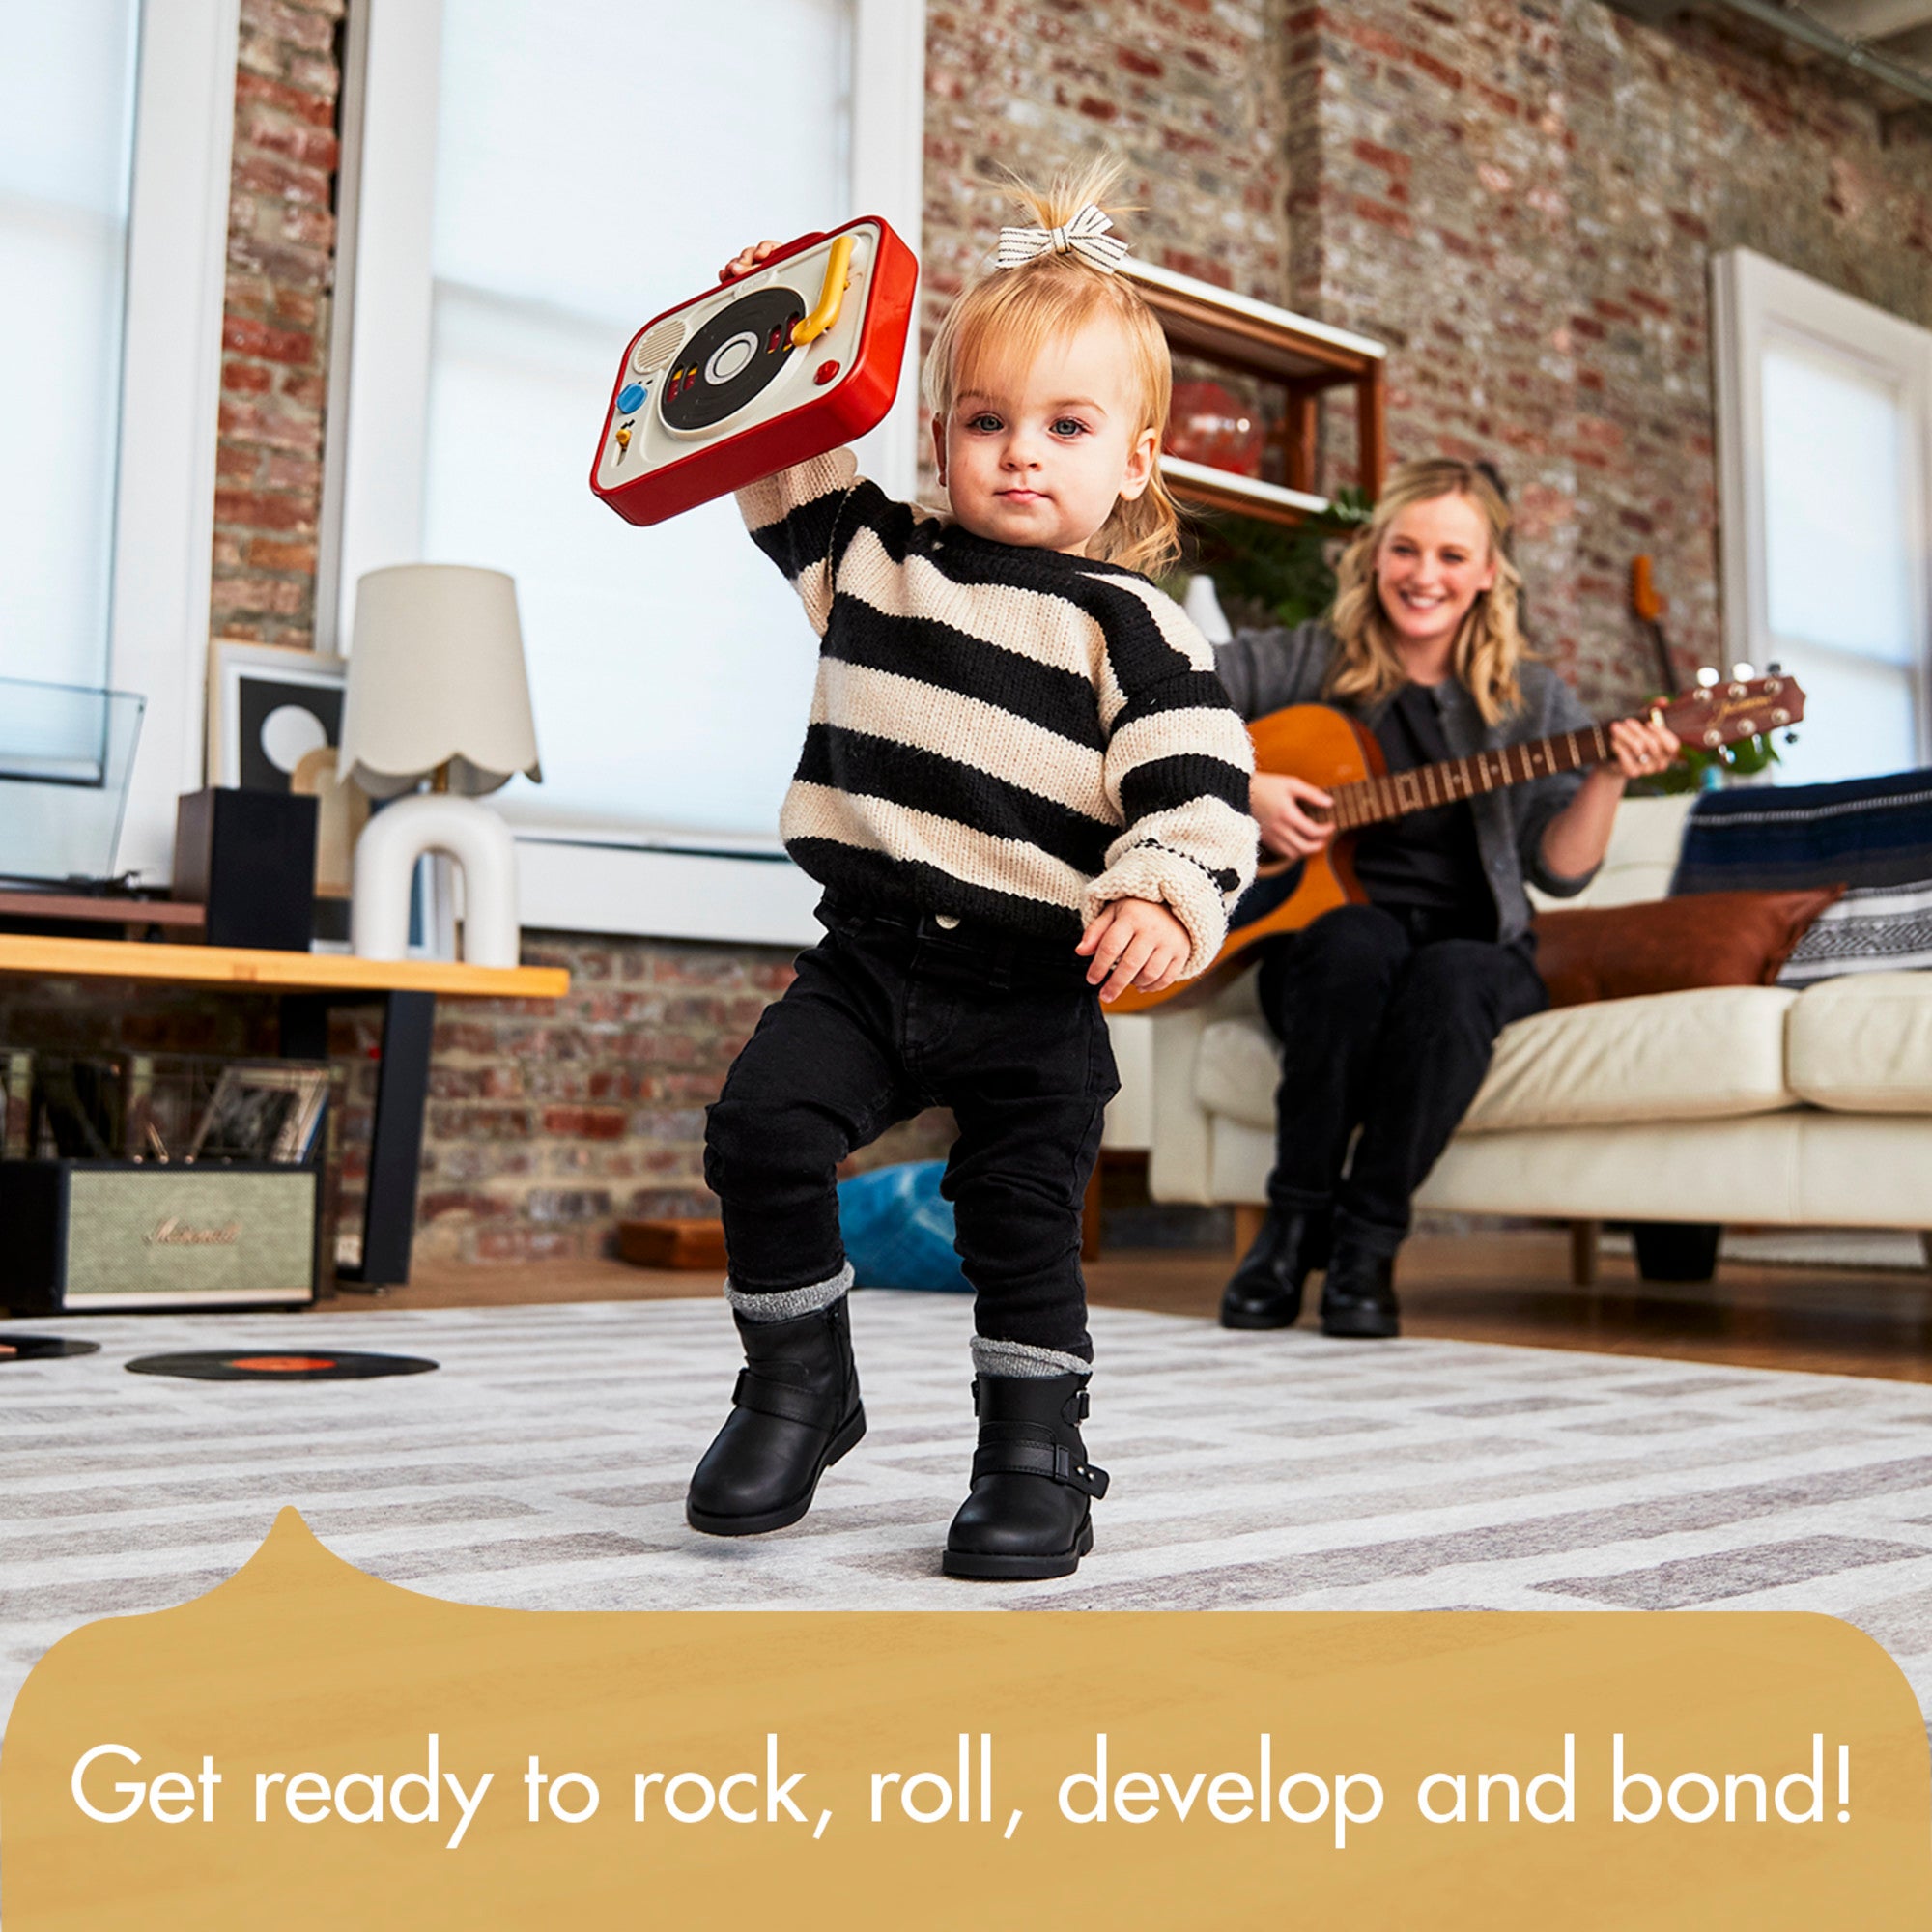 Tiny Rockers DJ Station - Get ready to rock, roll, develop and bond!